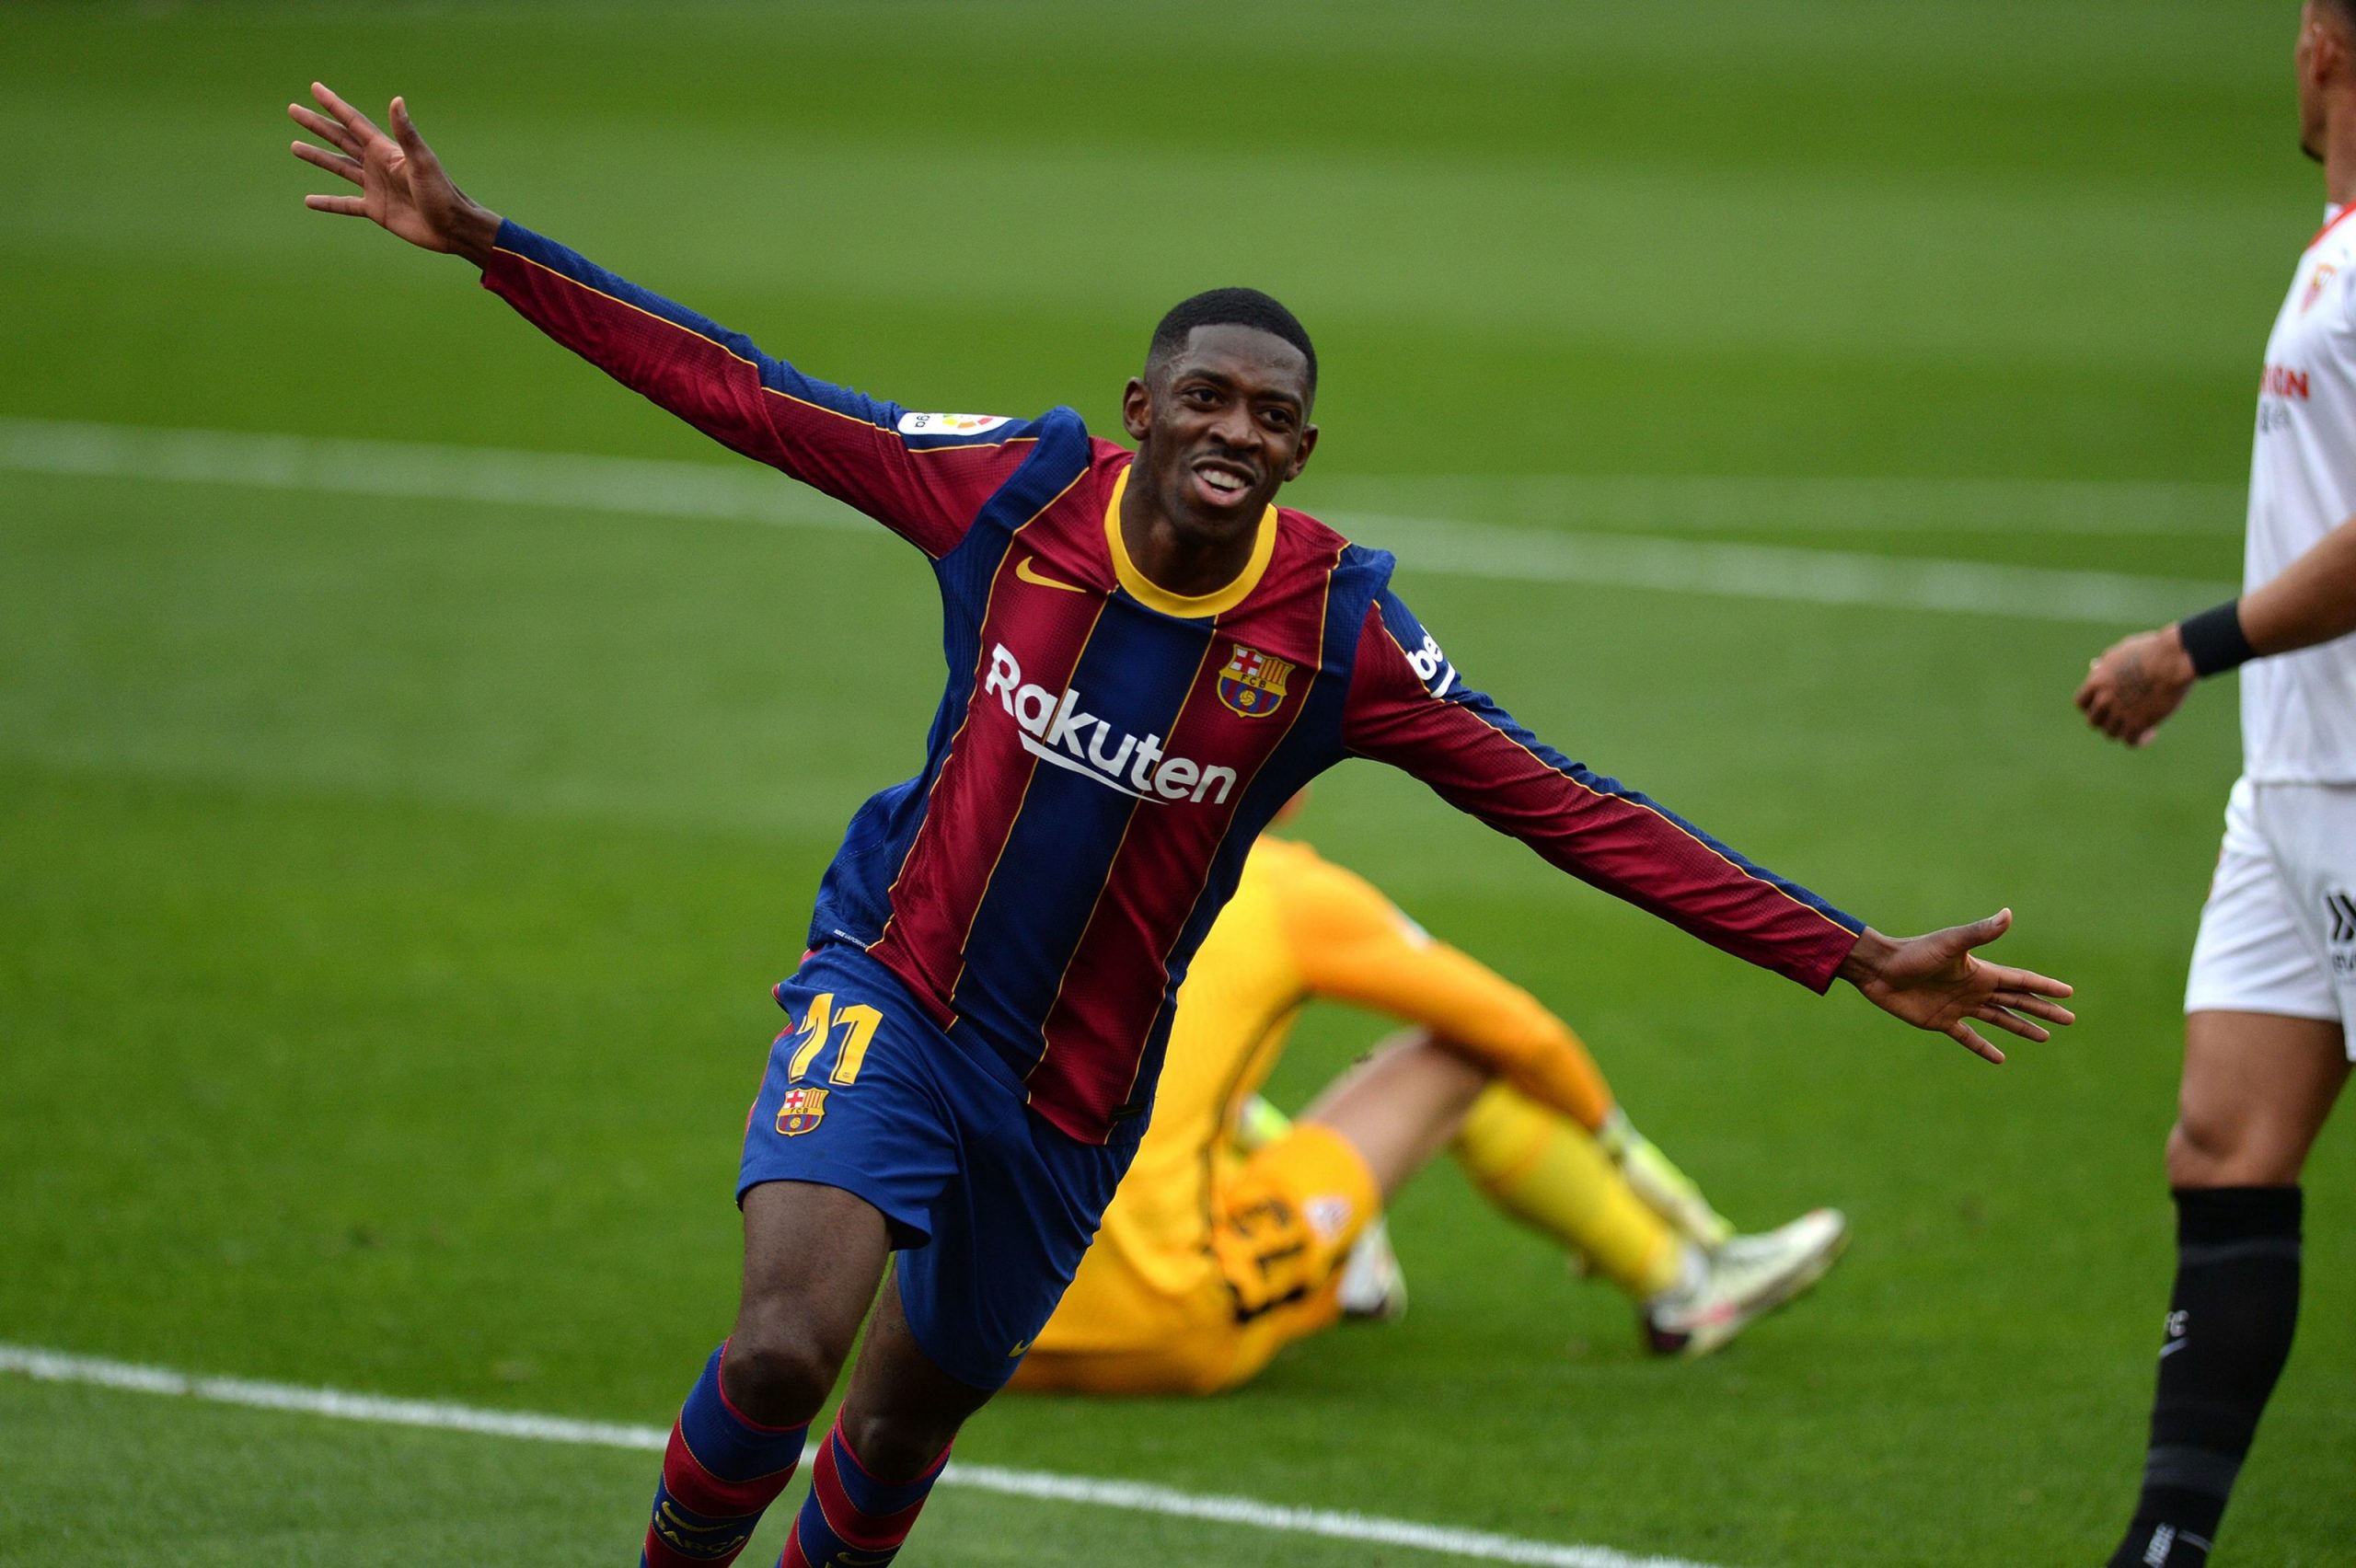 Barcelona's French forward Ousmane Dembele celebrates after scoring a goal (Photo by CRISTINA QUICLER / AFP) (Photo by CRISTINA QUICLER/AFP via Getty Images)